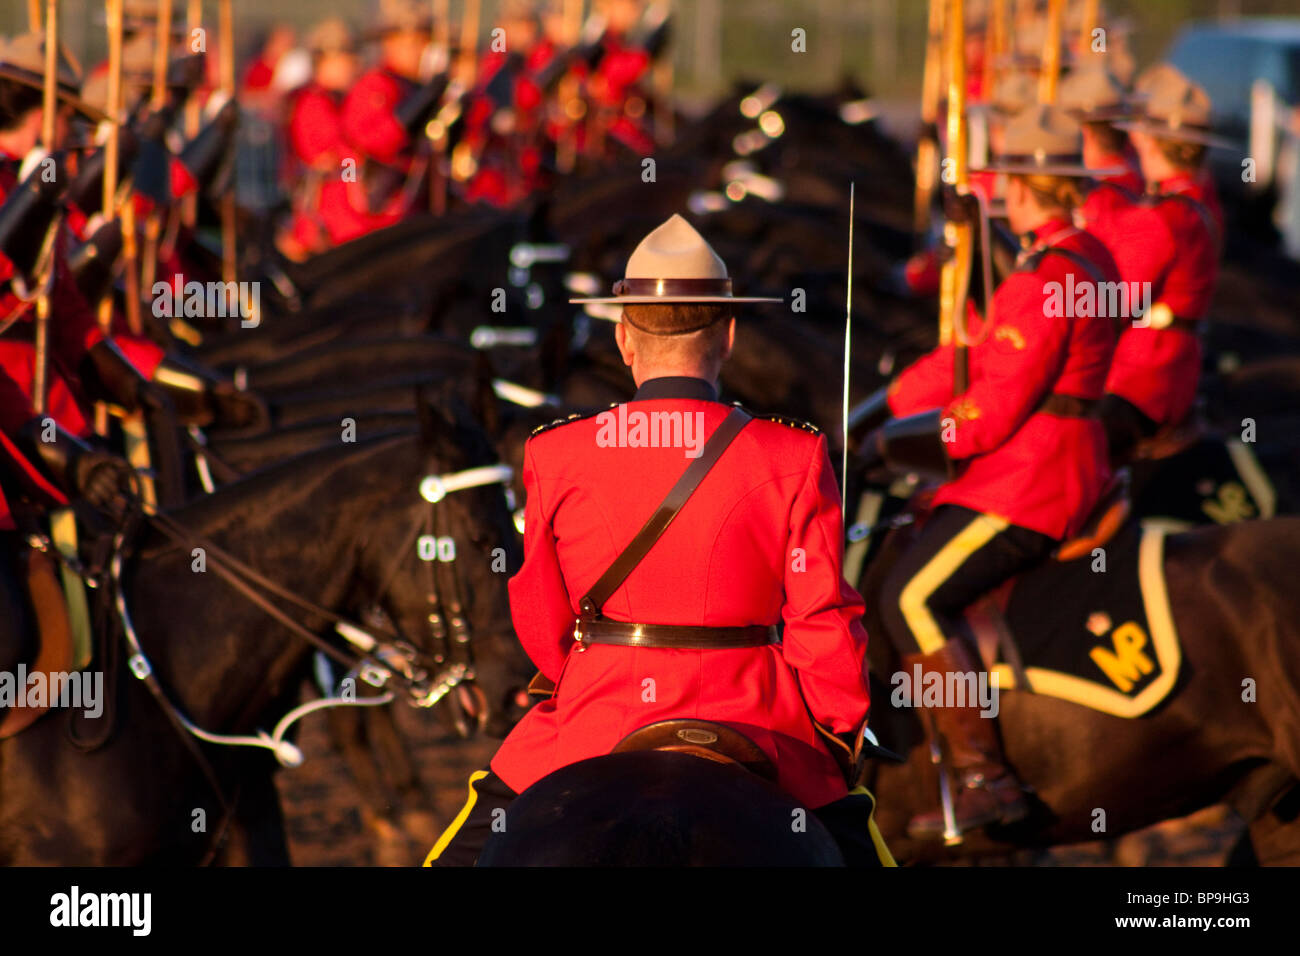 Royal Canadian Mounted Police Musical RIde Stock Photo